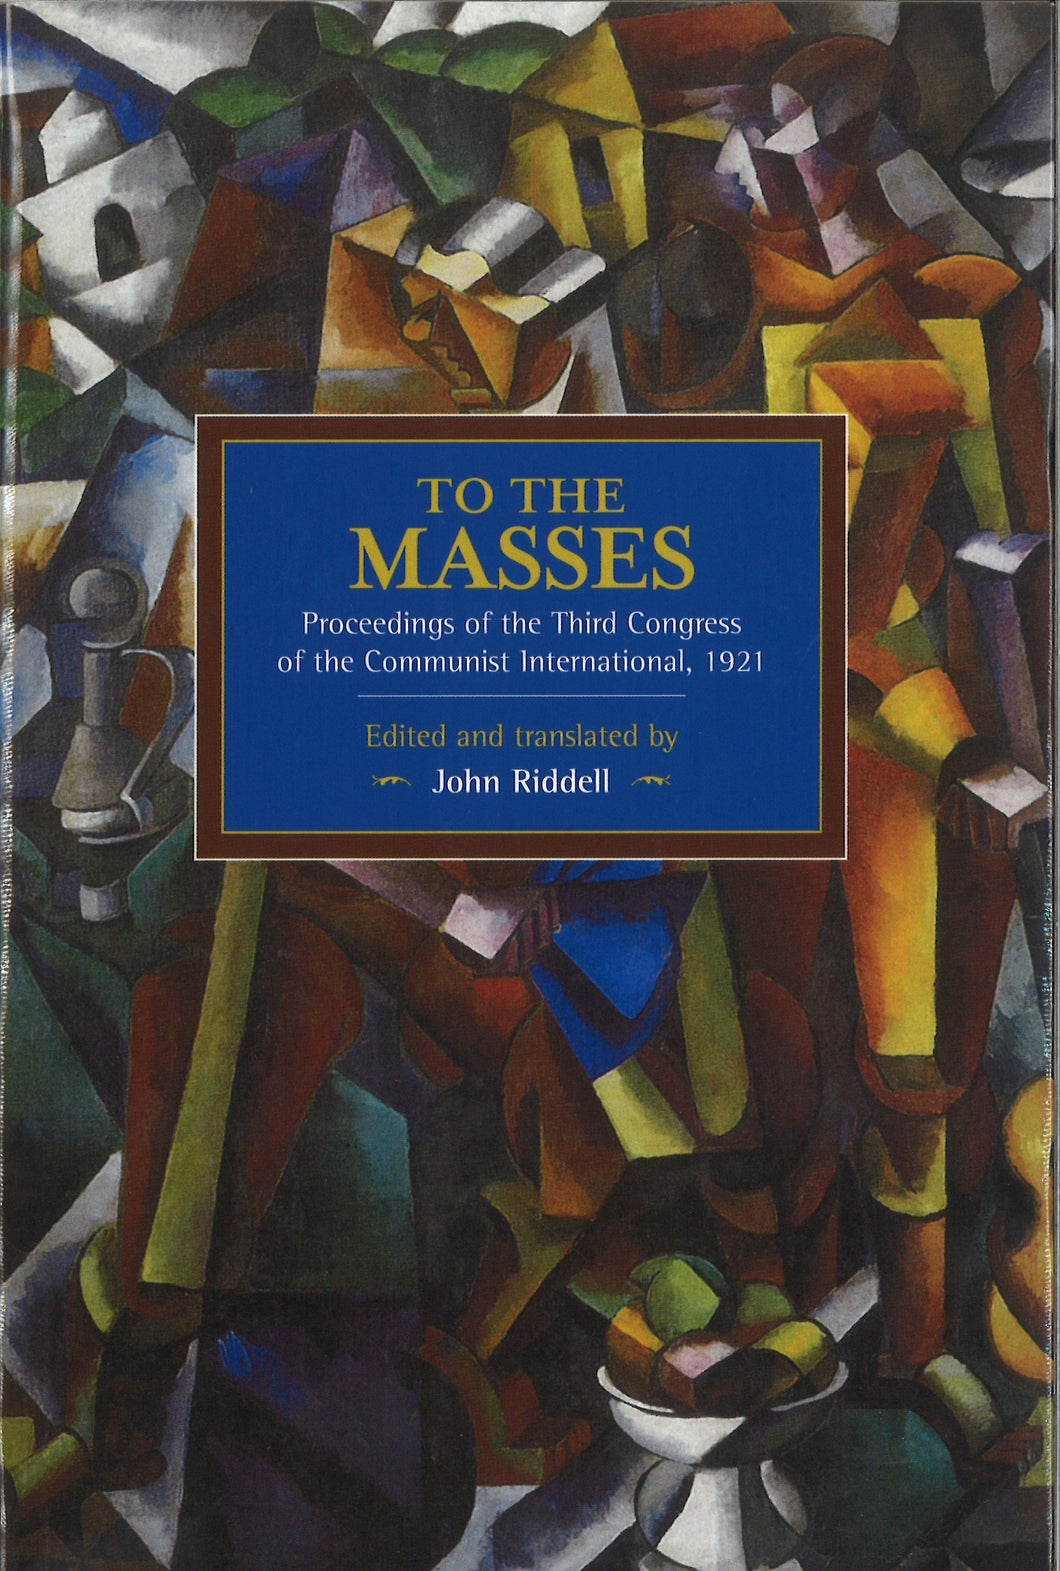 To the Masses: Proceedings of the Third Congress of the Communist International, 1921 (Historical Materialism Book)